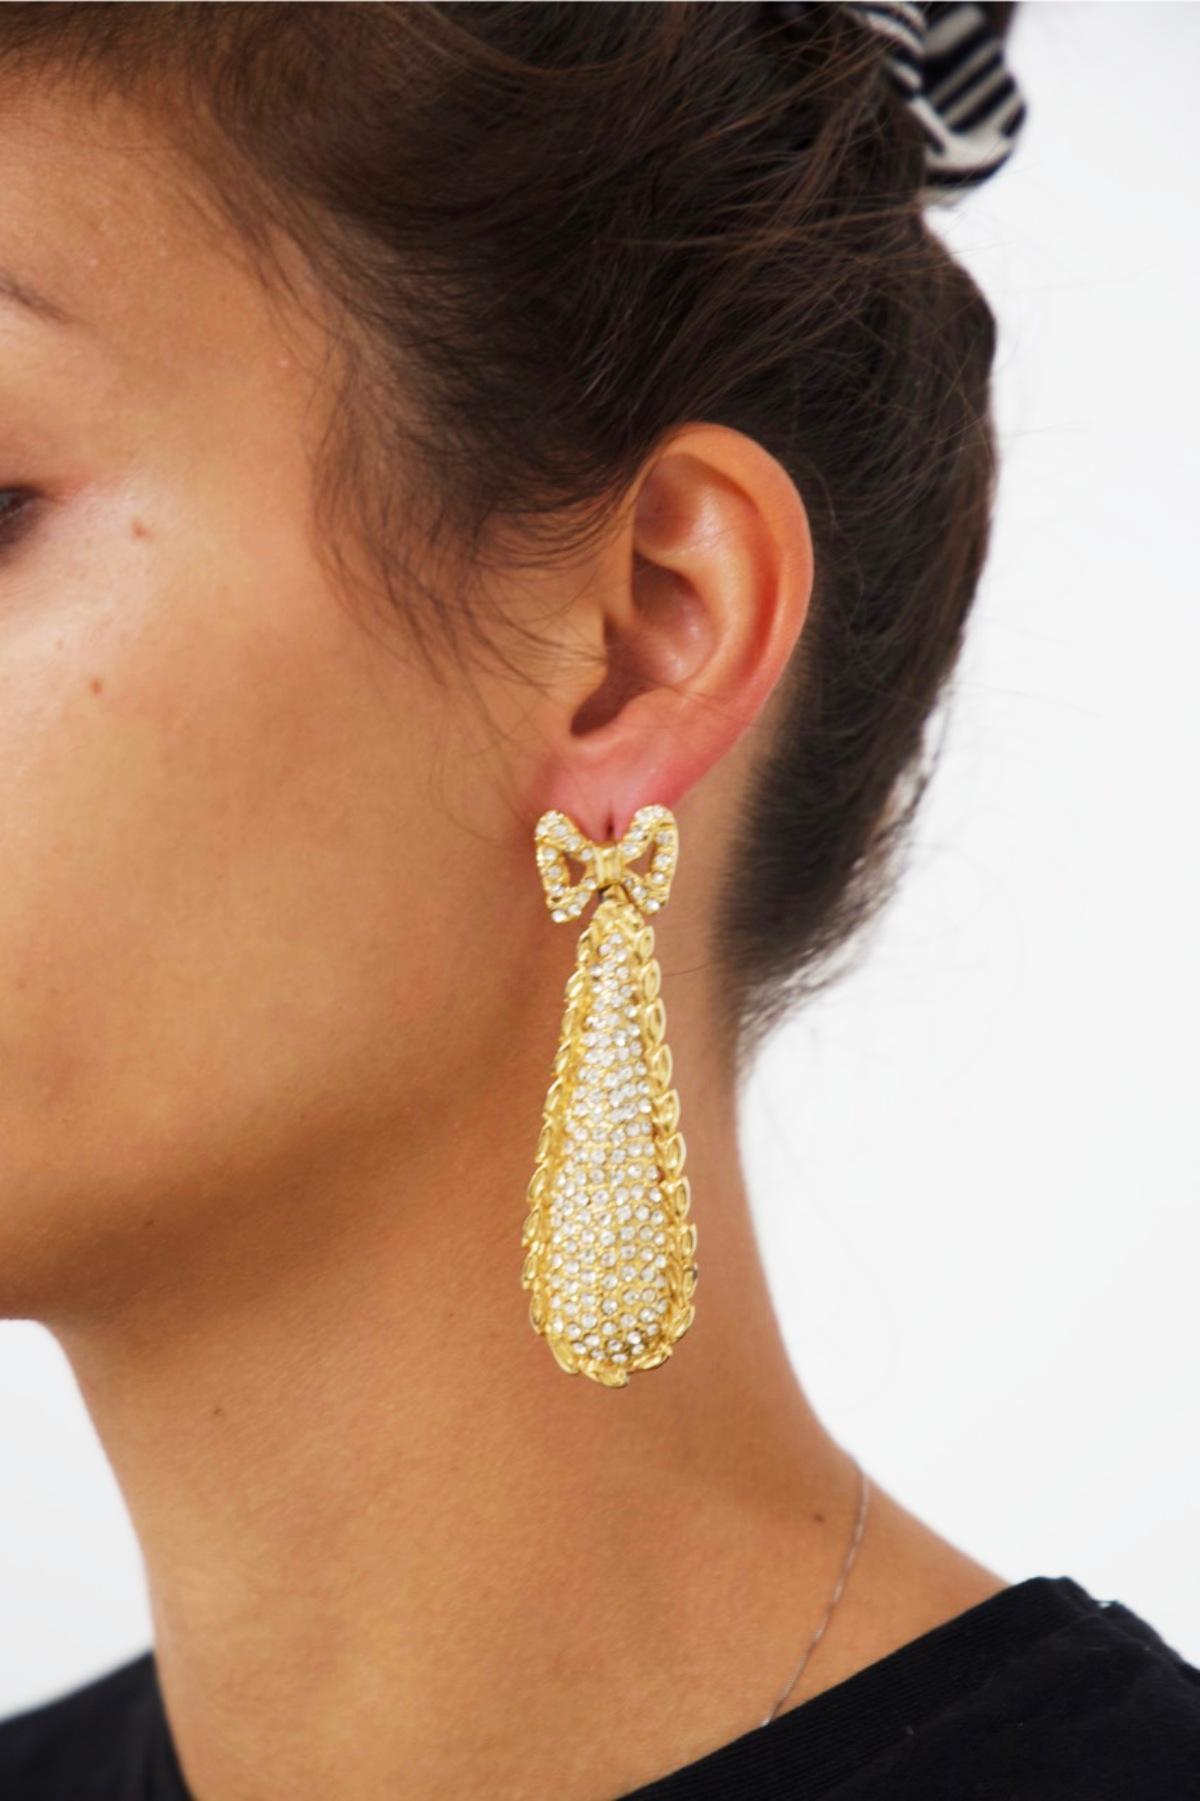 Beautiful pair of gold-plated metal alloy earrings dating from the 1980s, made in France.
The earrings are made of a fine gold-plated metal and have a dangling shape.
At the lobe is a little bow from the center of which the dangling body of the